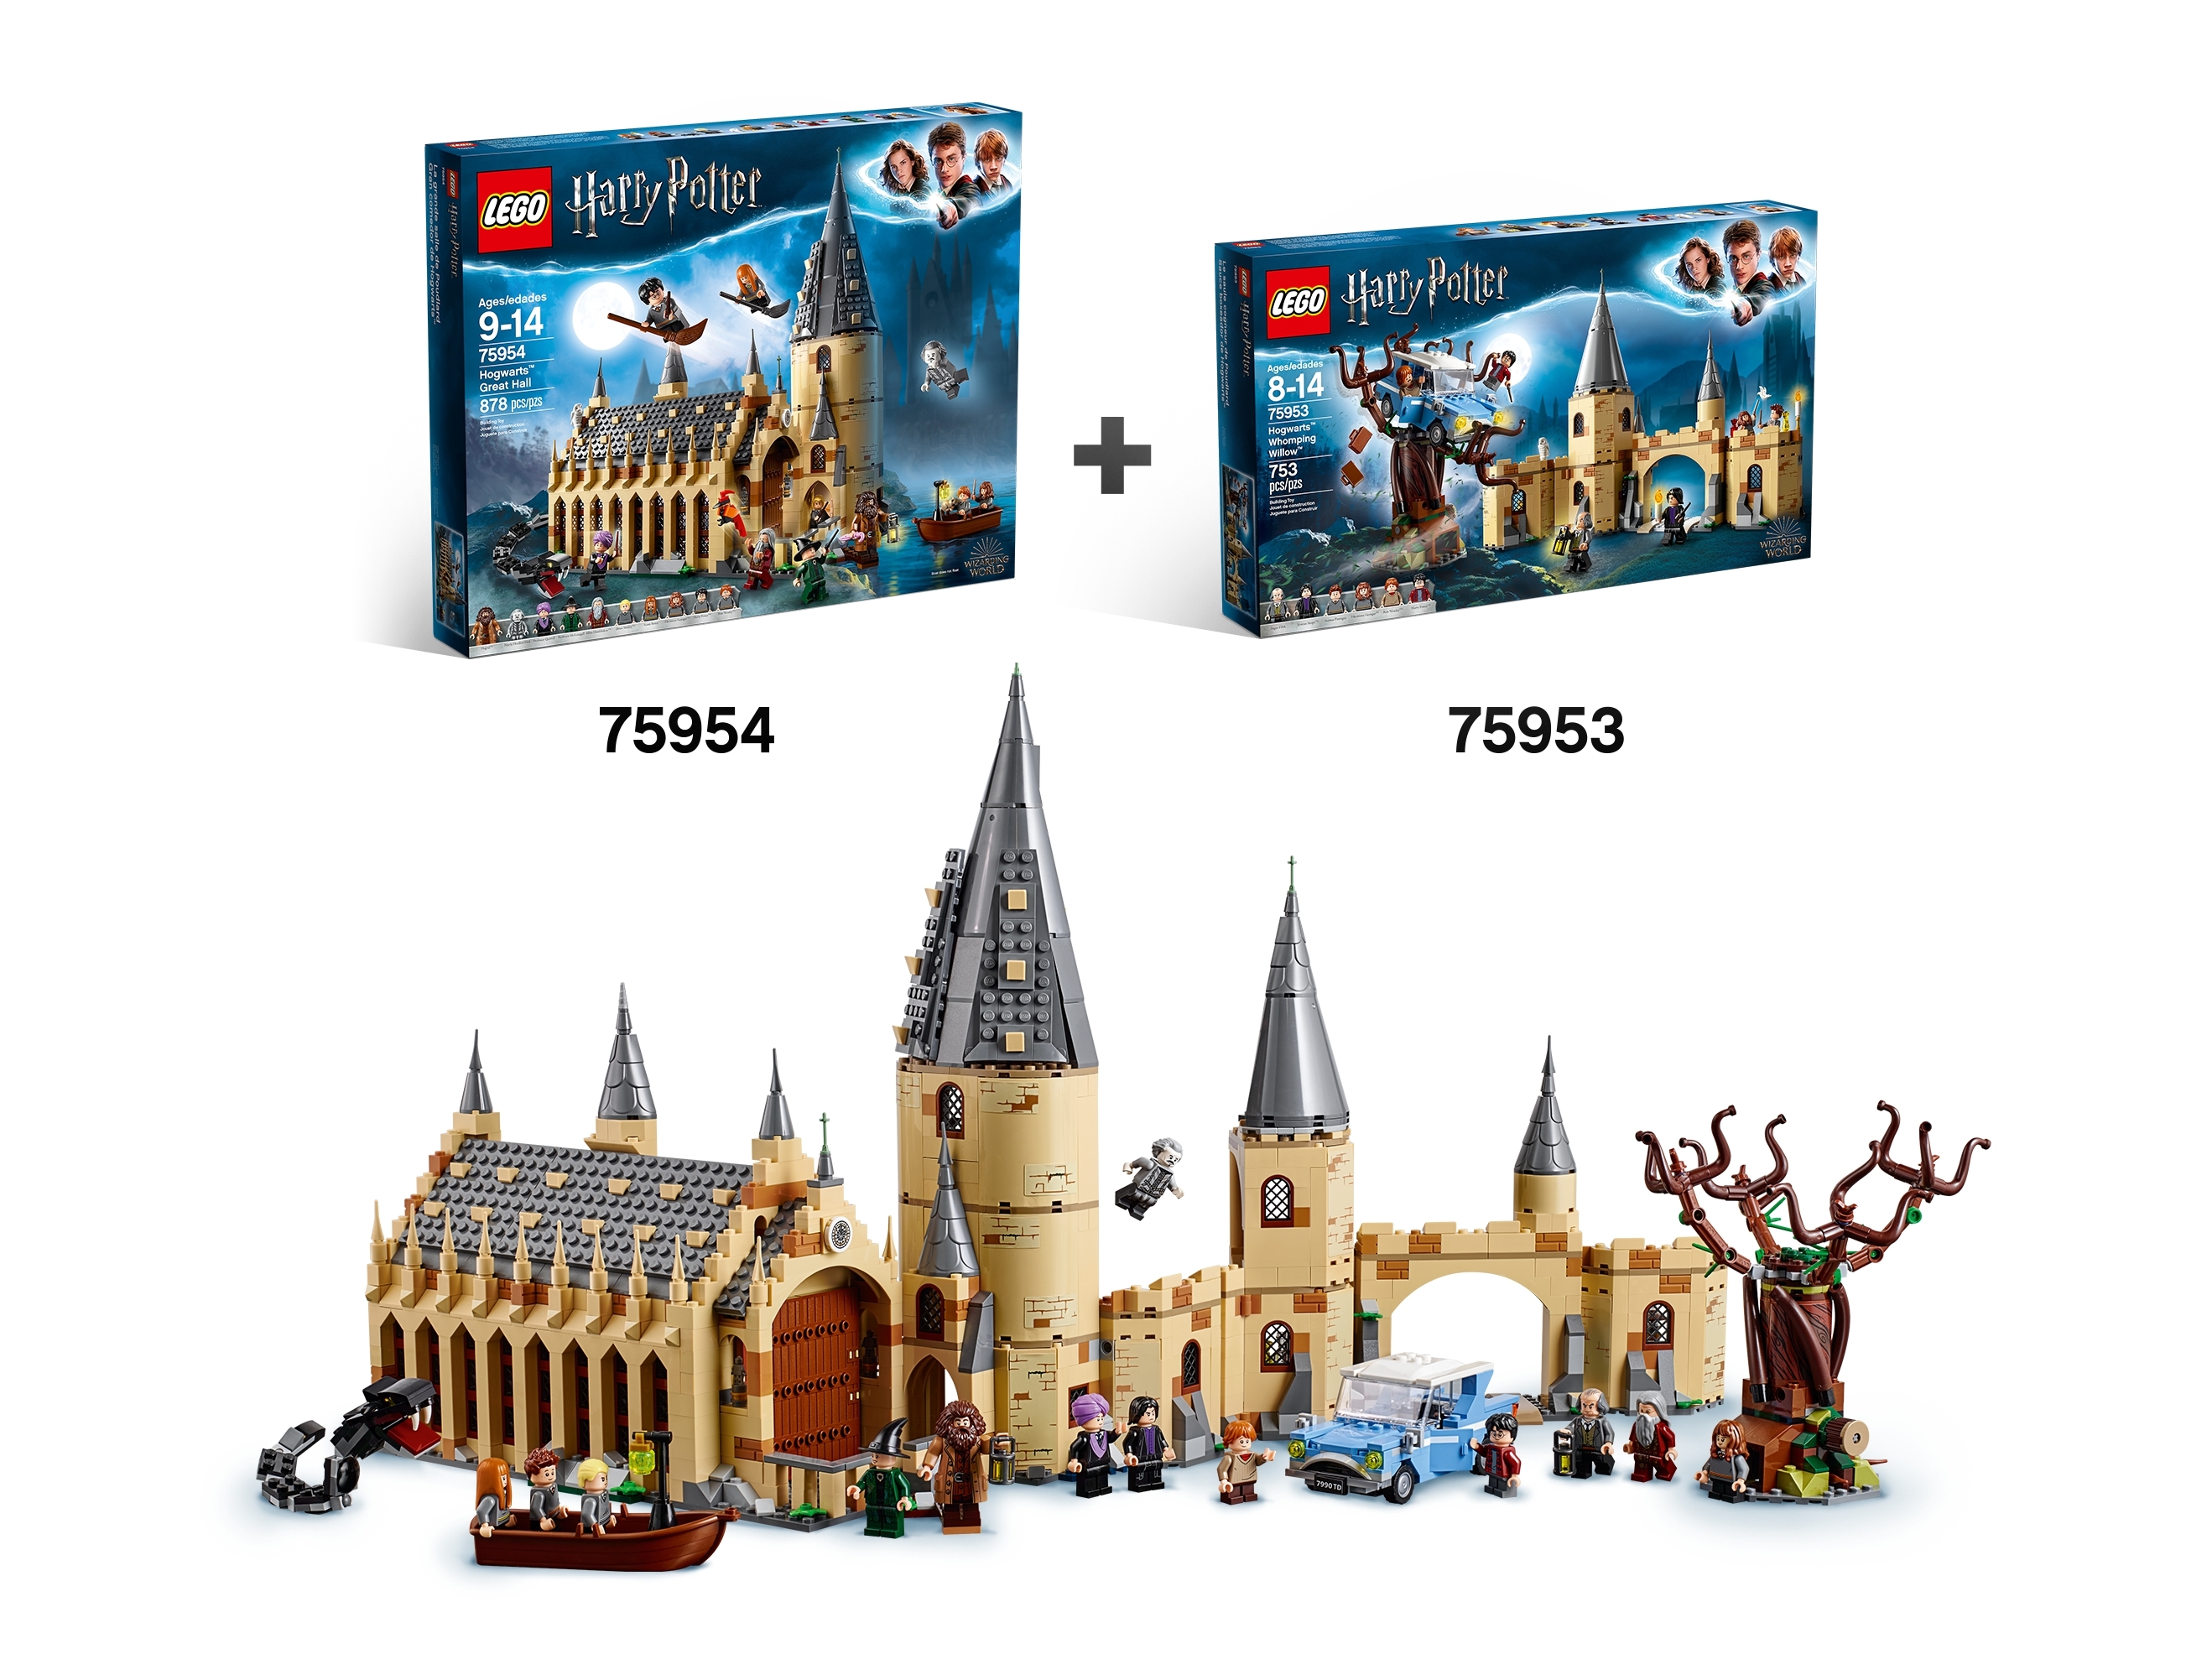 for sale online 75953 LEGO Hogwarts Whomping Willow Harry Potter TM